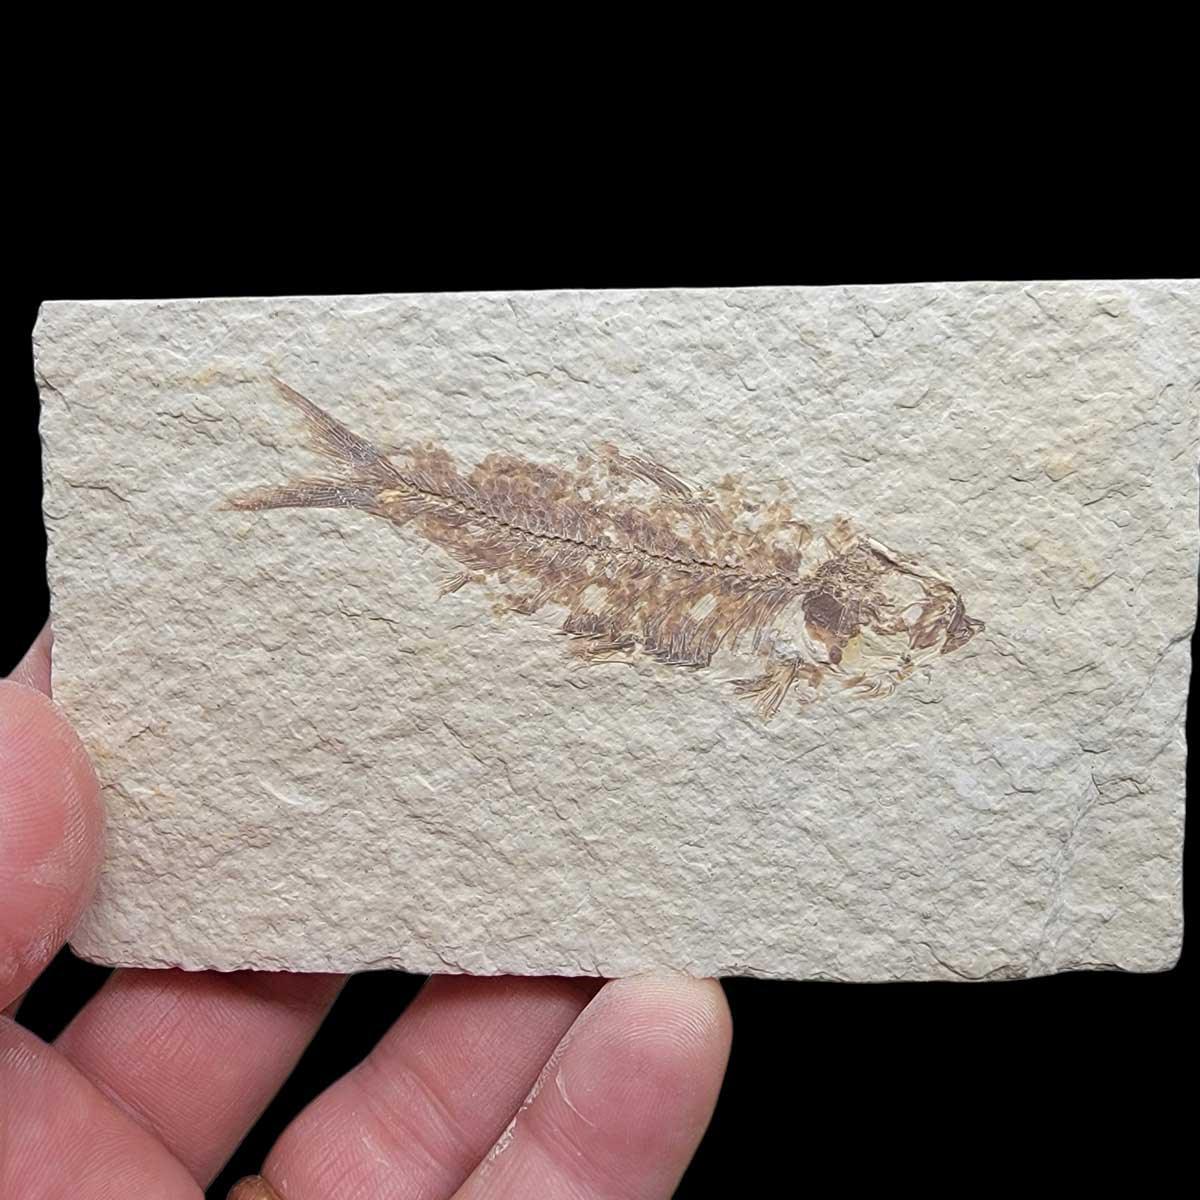 Fossil Knightia Fish Plate Fossil Specimen! 90% Whole and completely authentic! - LapidaryCentral